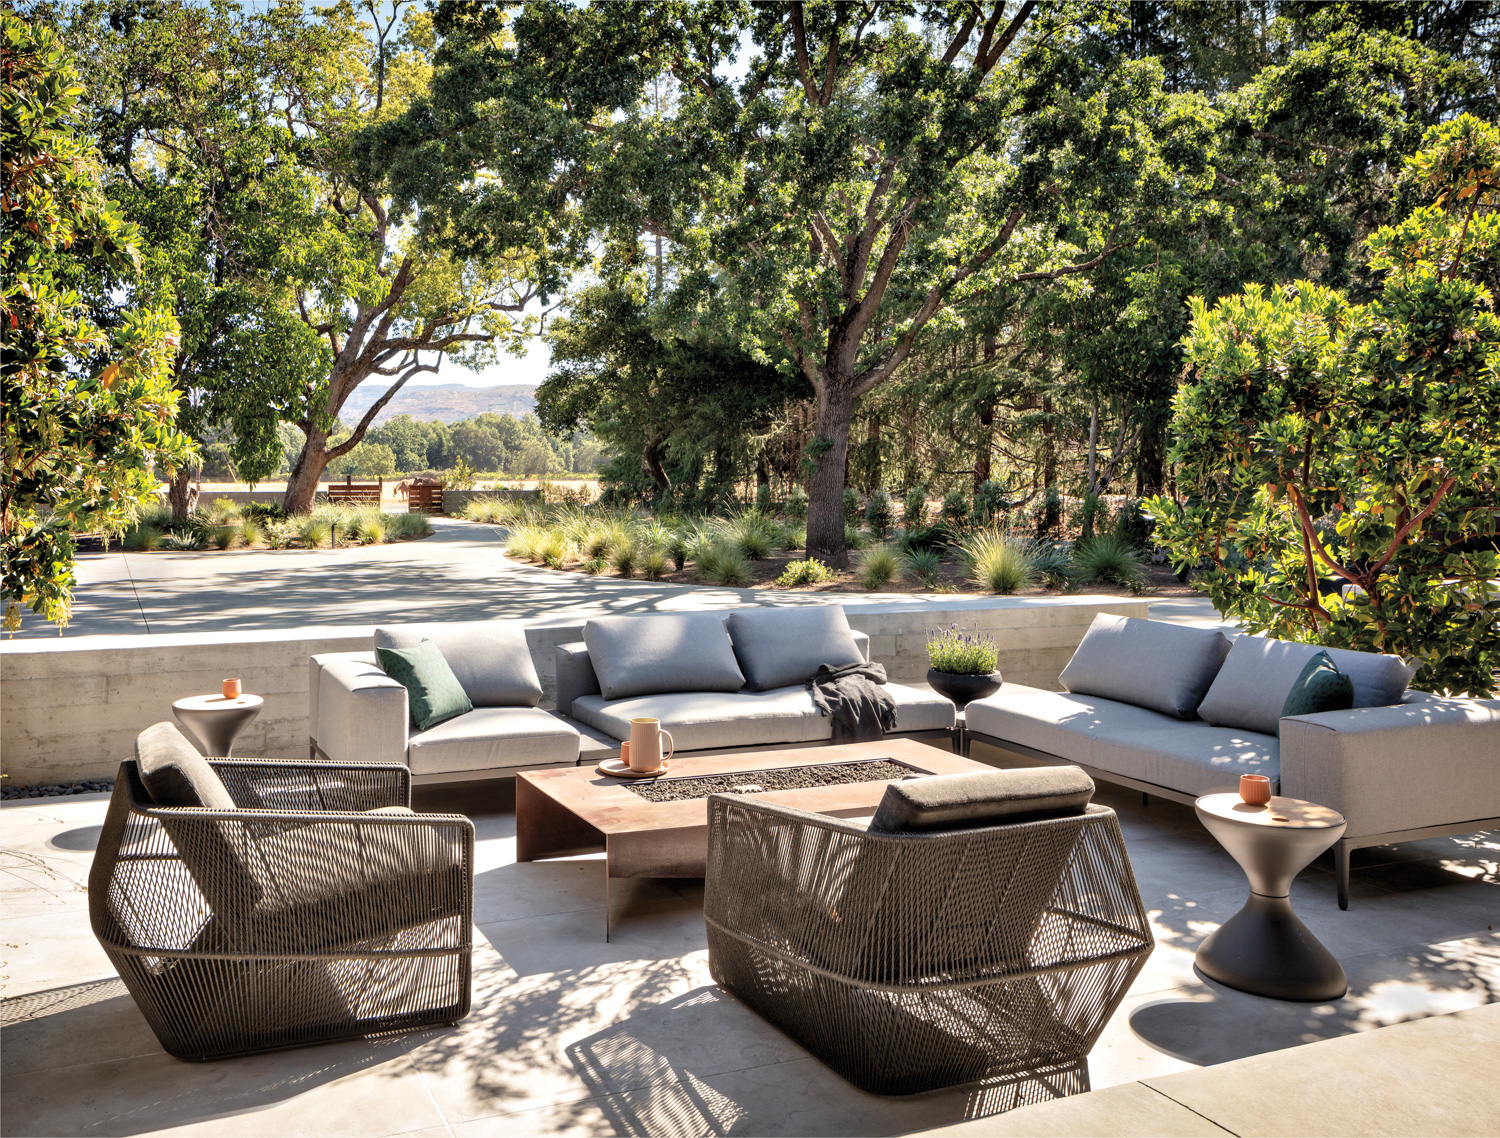 plush seating arranged around a fire pit with lush landscape views is good garden inspiration